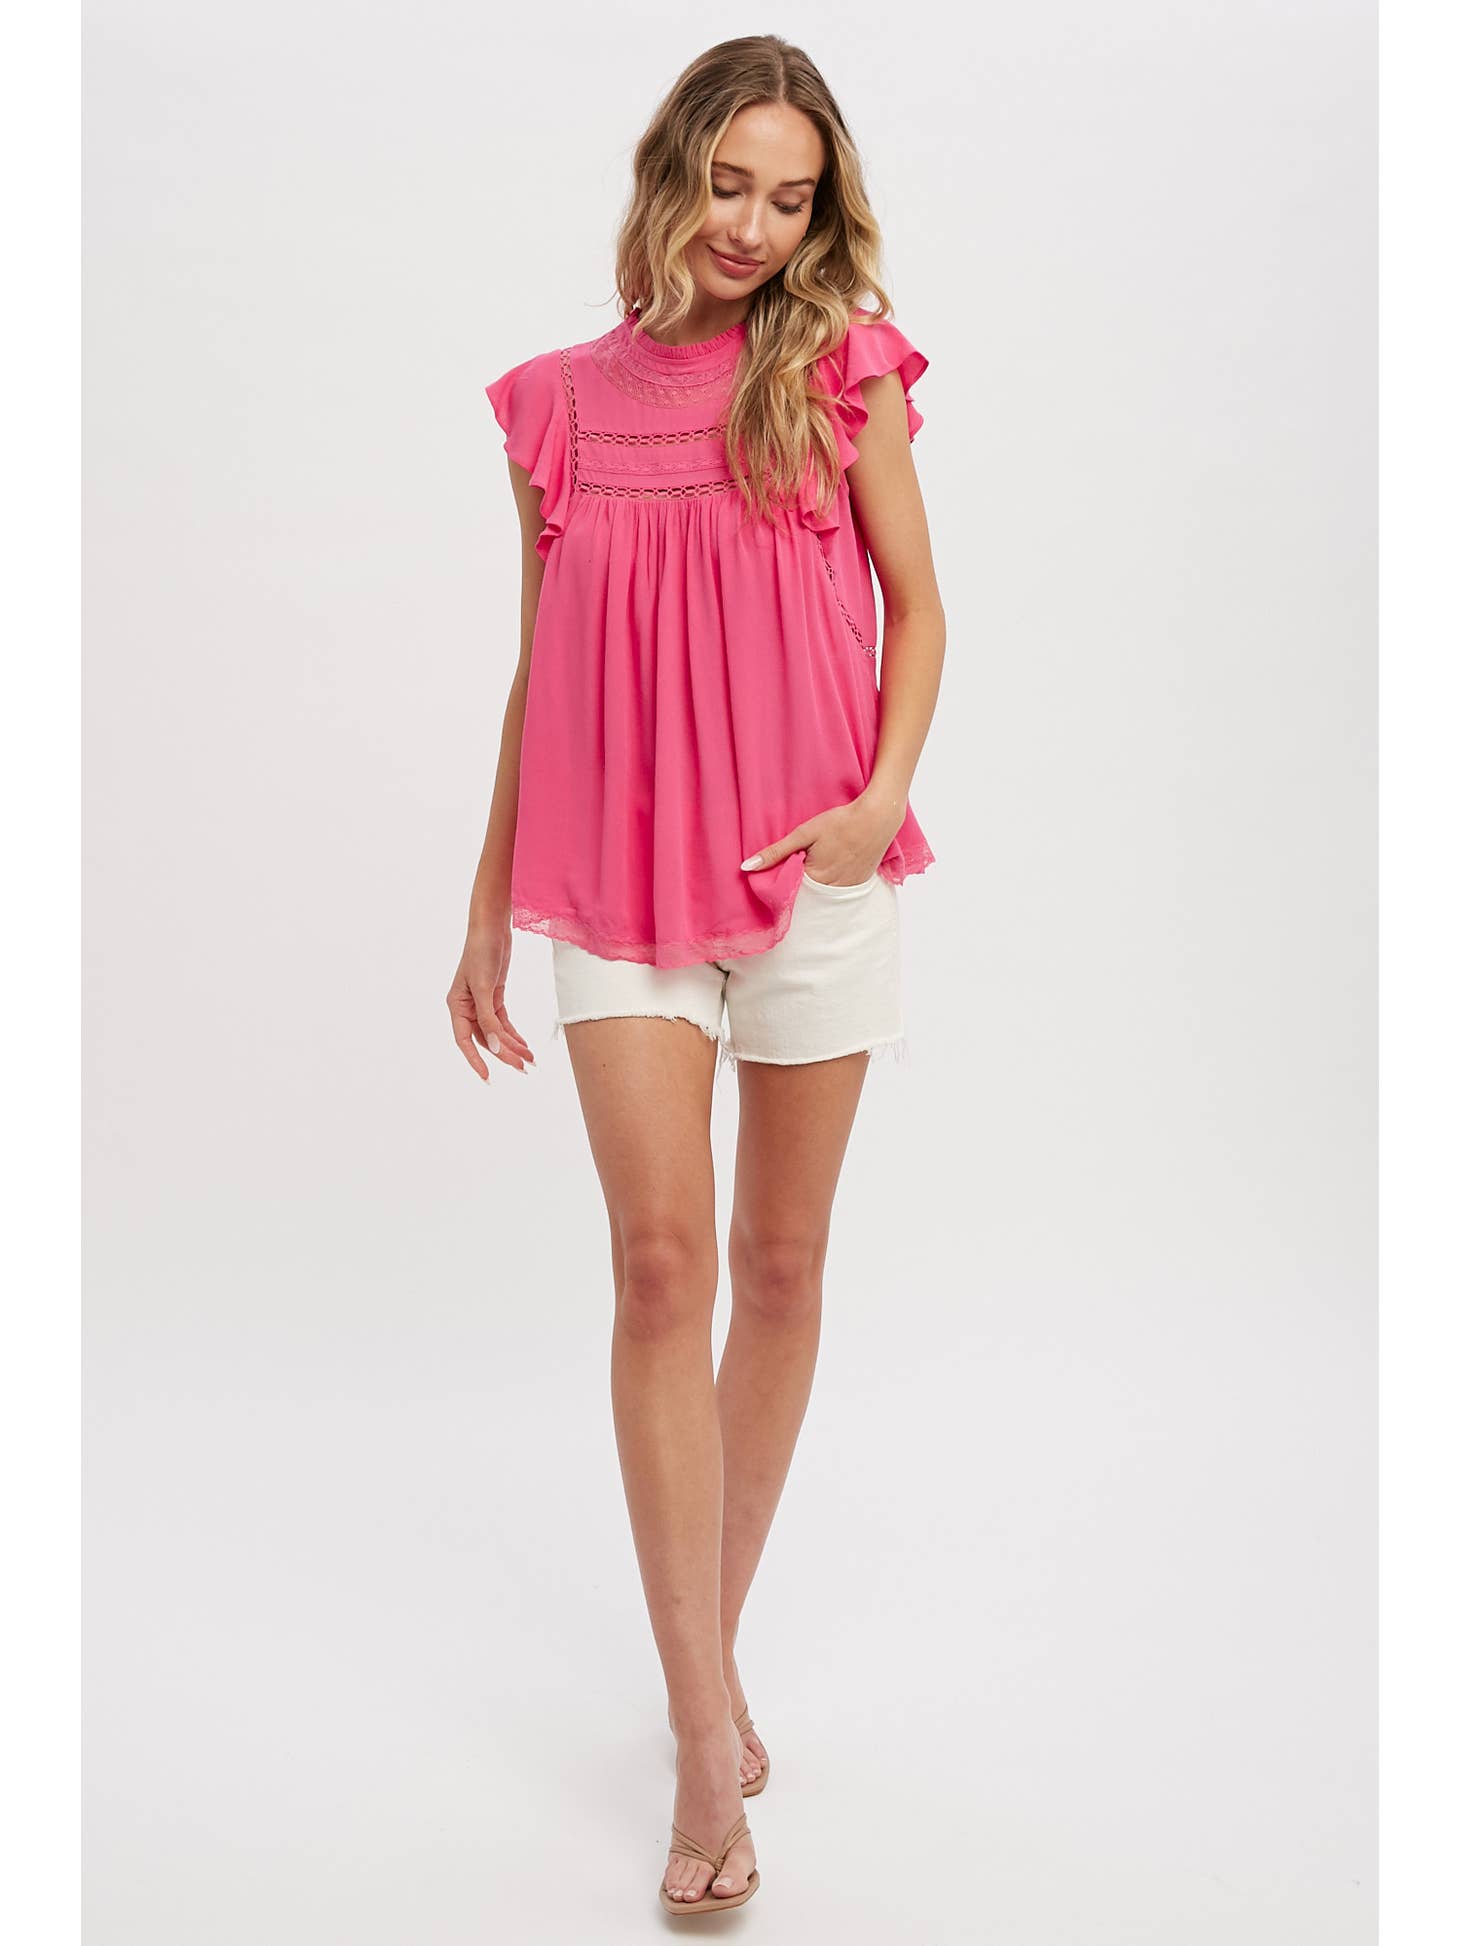 Relaxed Fit Baby Doll Top